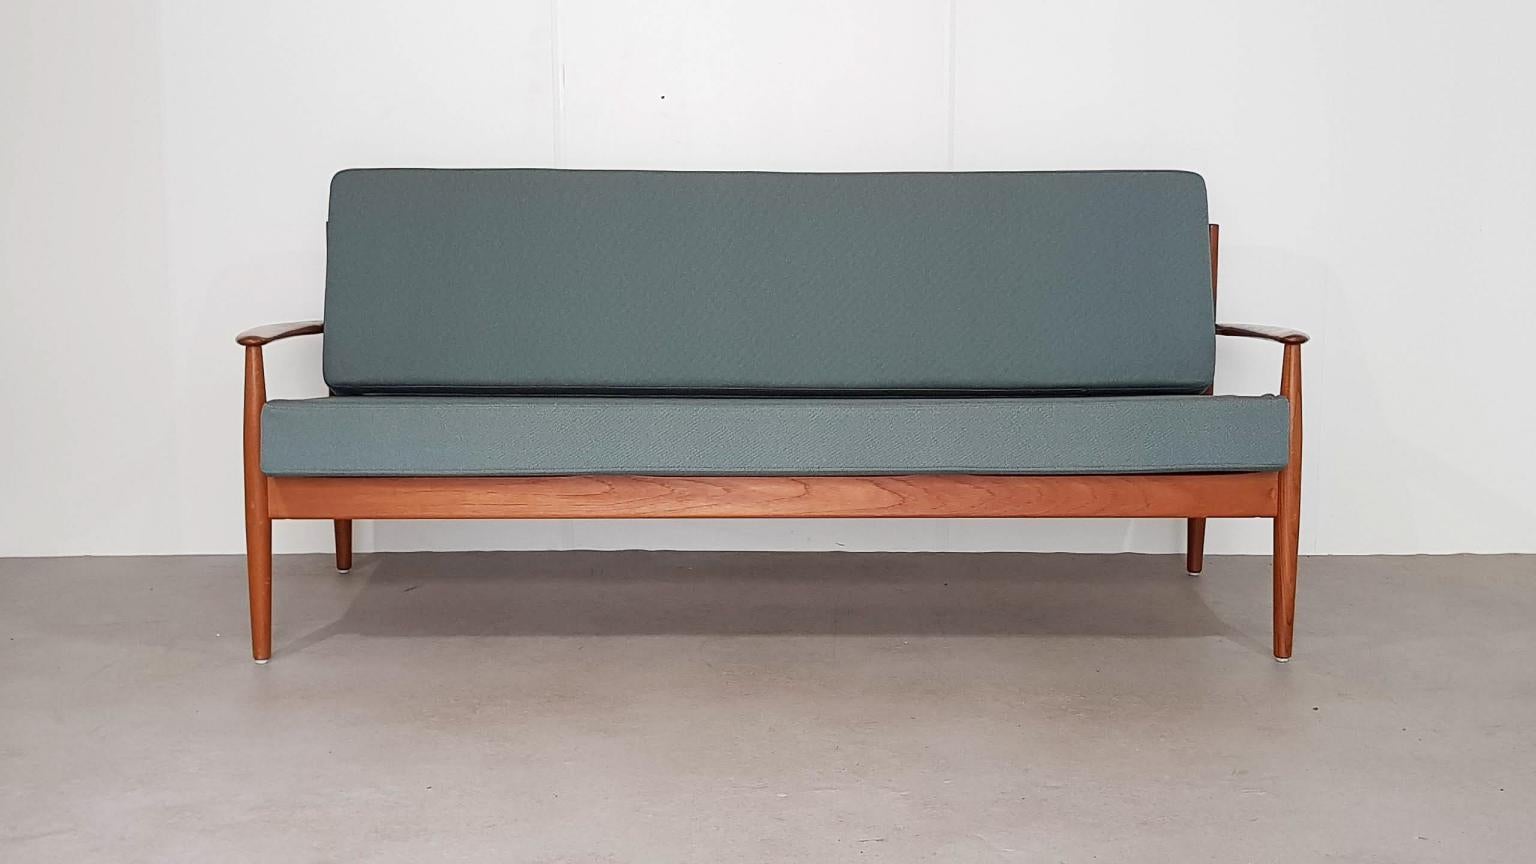 Teak sofa by Grete Jalk for France and Son, model 118, Denmark, 1950s

In good condition with new light green upholstery.

Measures: Length 190 cm; seating 170 cm

Depth 80 cm; seating 50 cm

Height 84 cm; seating 45 cm.